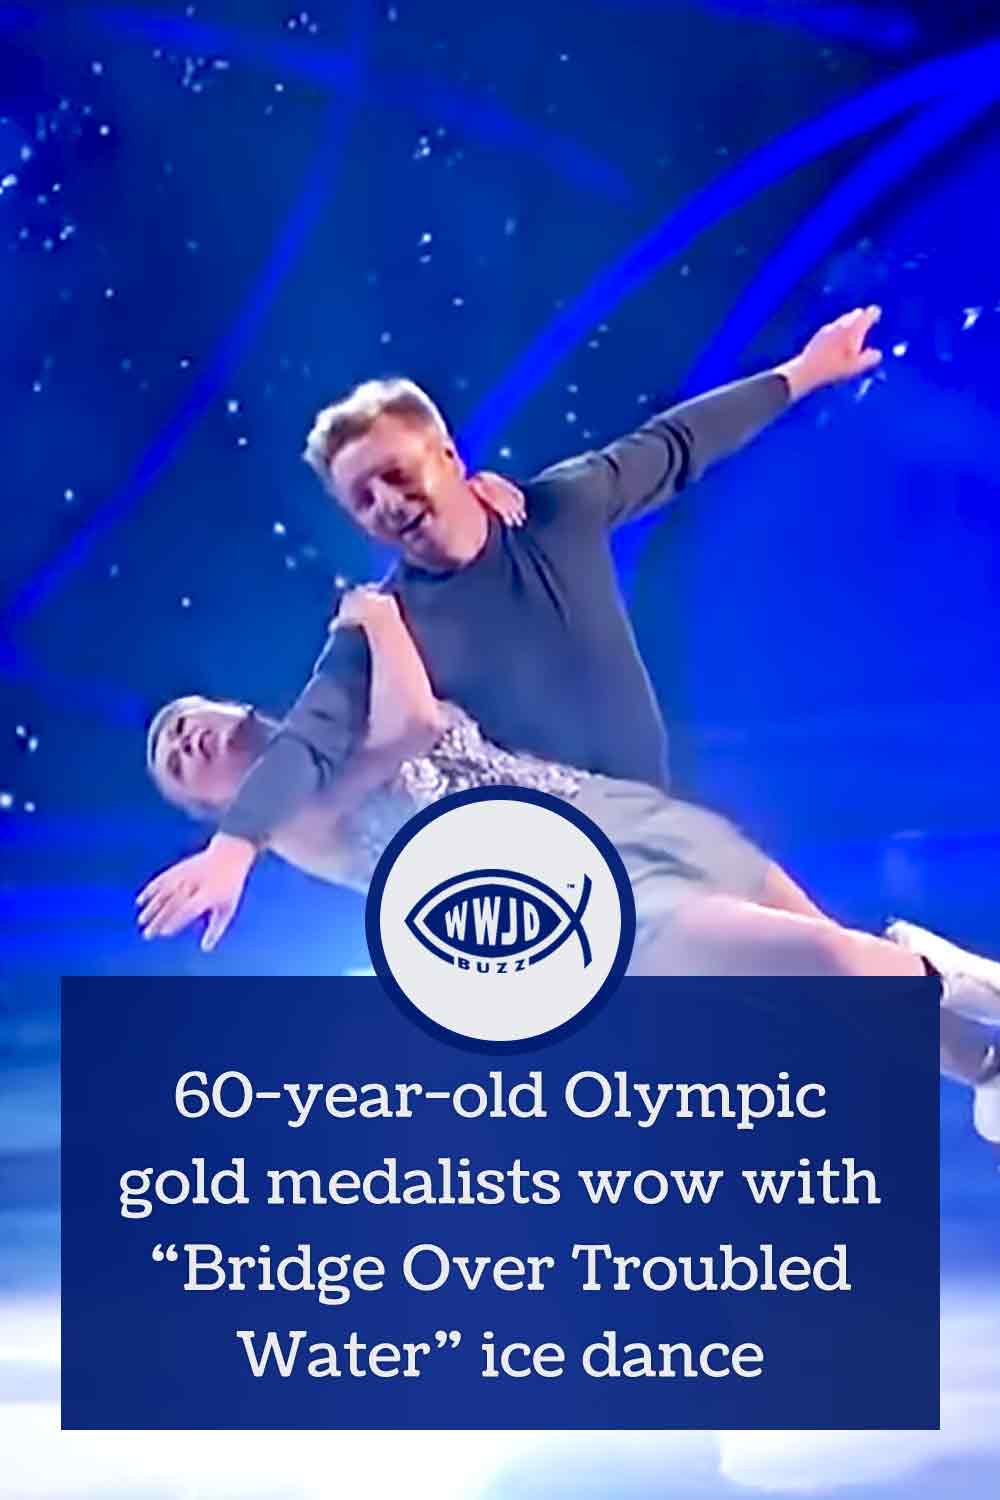 60-year-old Olympic gold medalists wow with “Bridge Over Troubled Water” ice dance